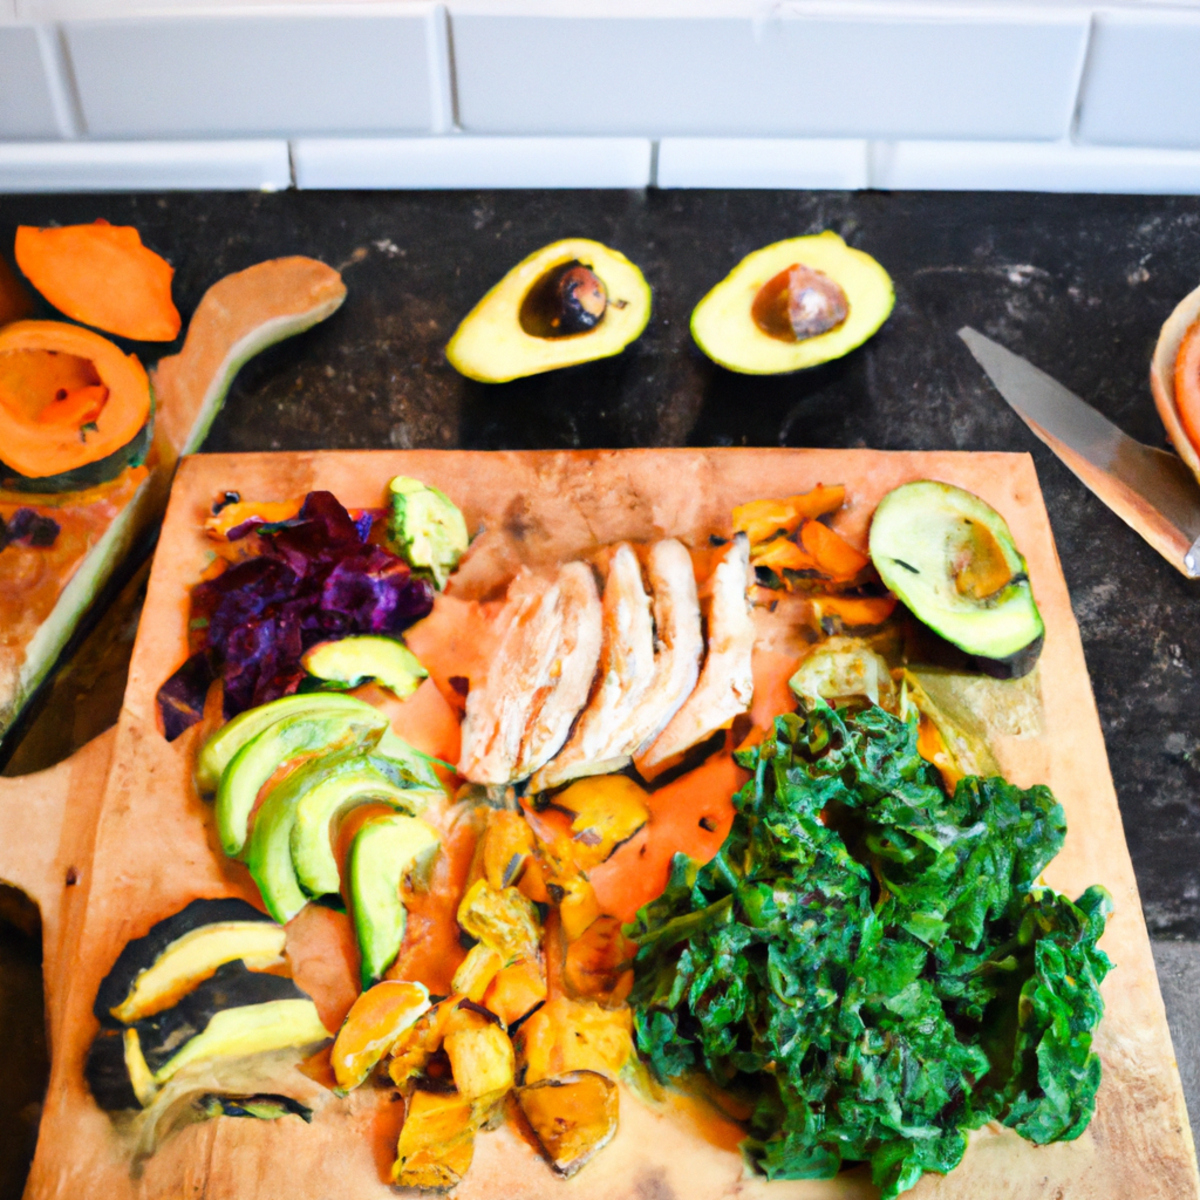 The photo features a wooden cutting board with an array of colorful and nutritious foods. In the center of the board, there is a sliced avocado with a sprinkle of sea salt and black pepper. Surrounding the avocado are slices of grilled chicken breast, roasted sweet potatoes, and sautéed kale. To the left of the board, there is a bowl of mixed berries, including strawberries, blueberries, and raspberries. On the right side of the board, there is a small dish of quinoa with chopped herbs and a drizzle of olive oil. The photo captures the vibrant colors and textures of the gluten-free foods, enticing readers to try these healthy options for post-workout recovery.